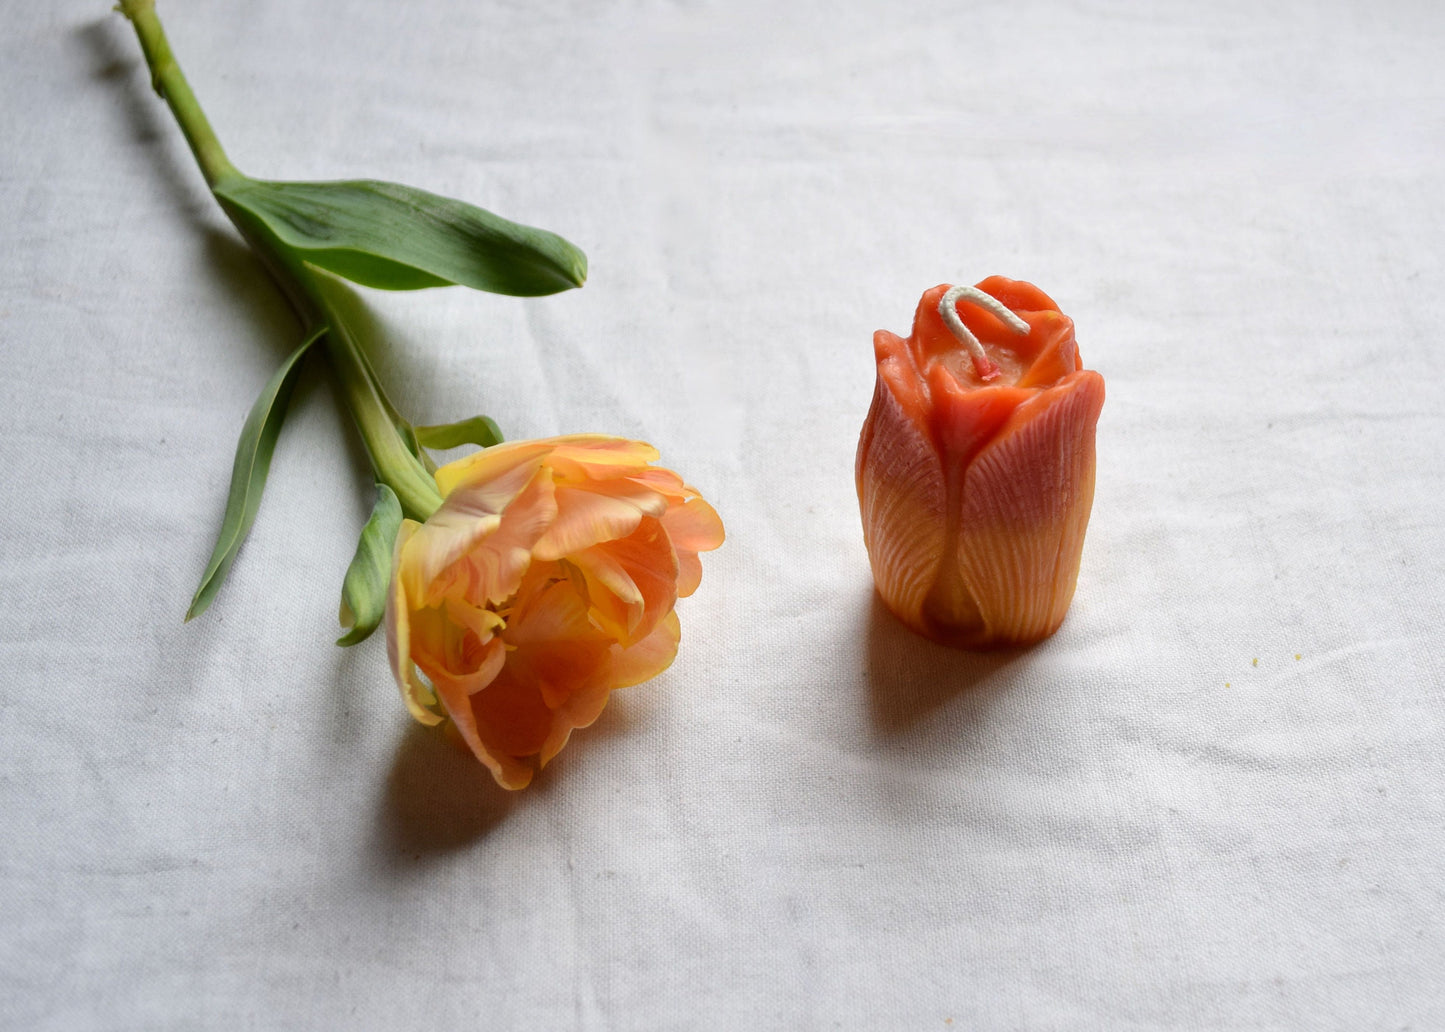 Tulip Beeswax Candle - Many Color Choices //  Petals, Tulip, Flower Candle, Beeswax, Candle, Botanical, Handcrafted